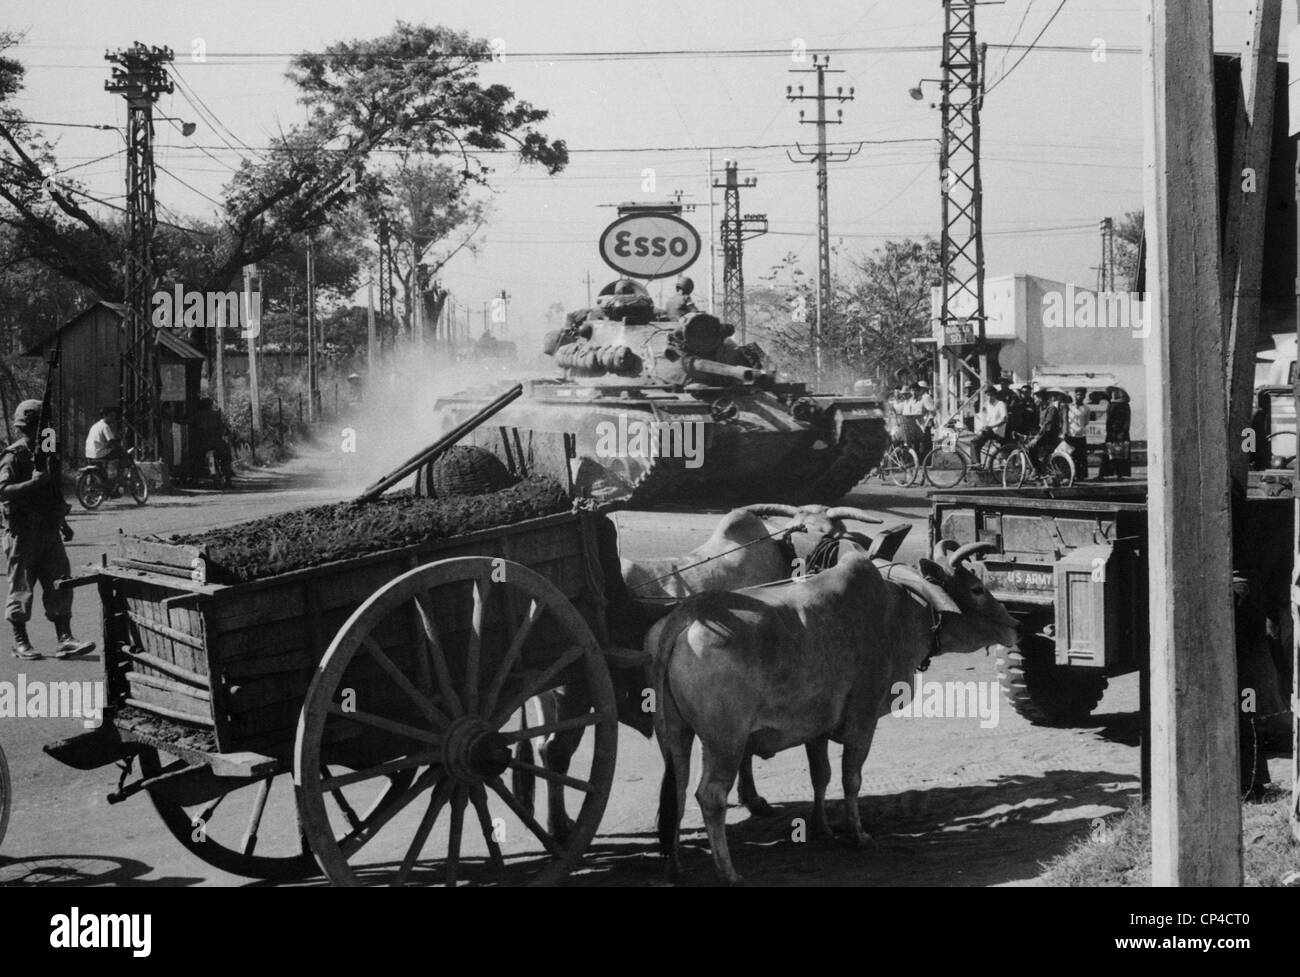 Vietnam War. A US Army tank shares the streets of Saigon with ox carts during the second year of the US escalation of the war. Stock Photo